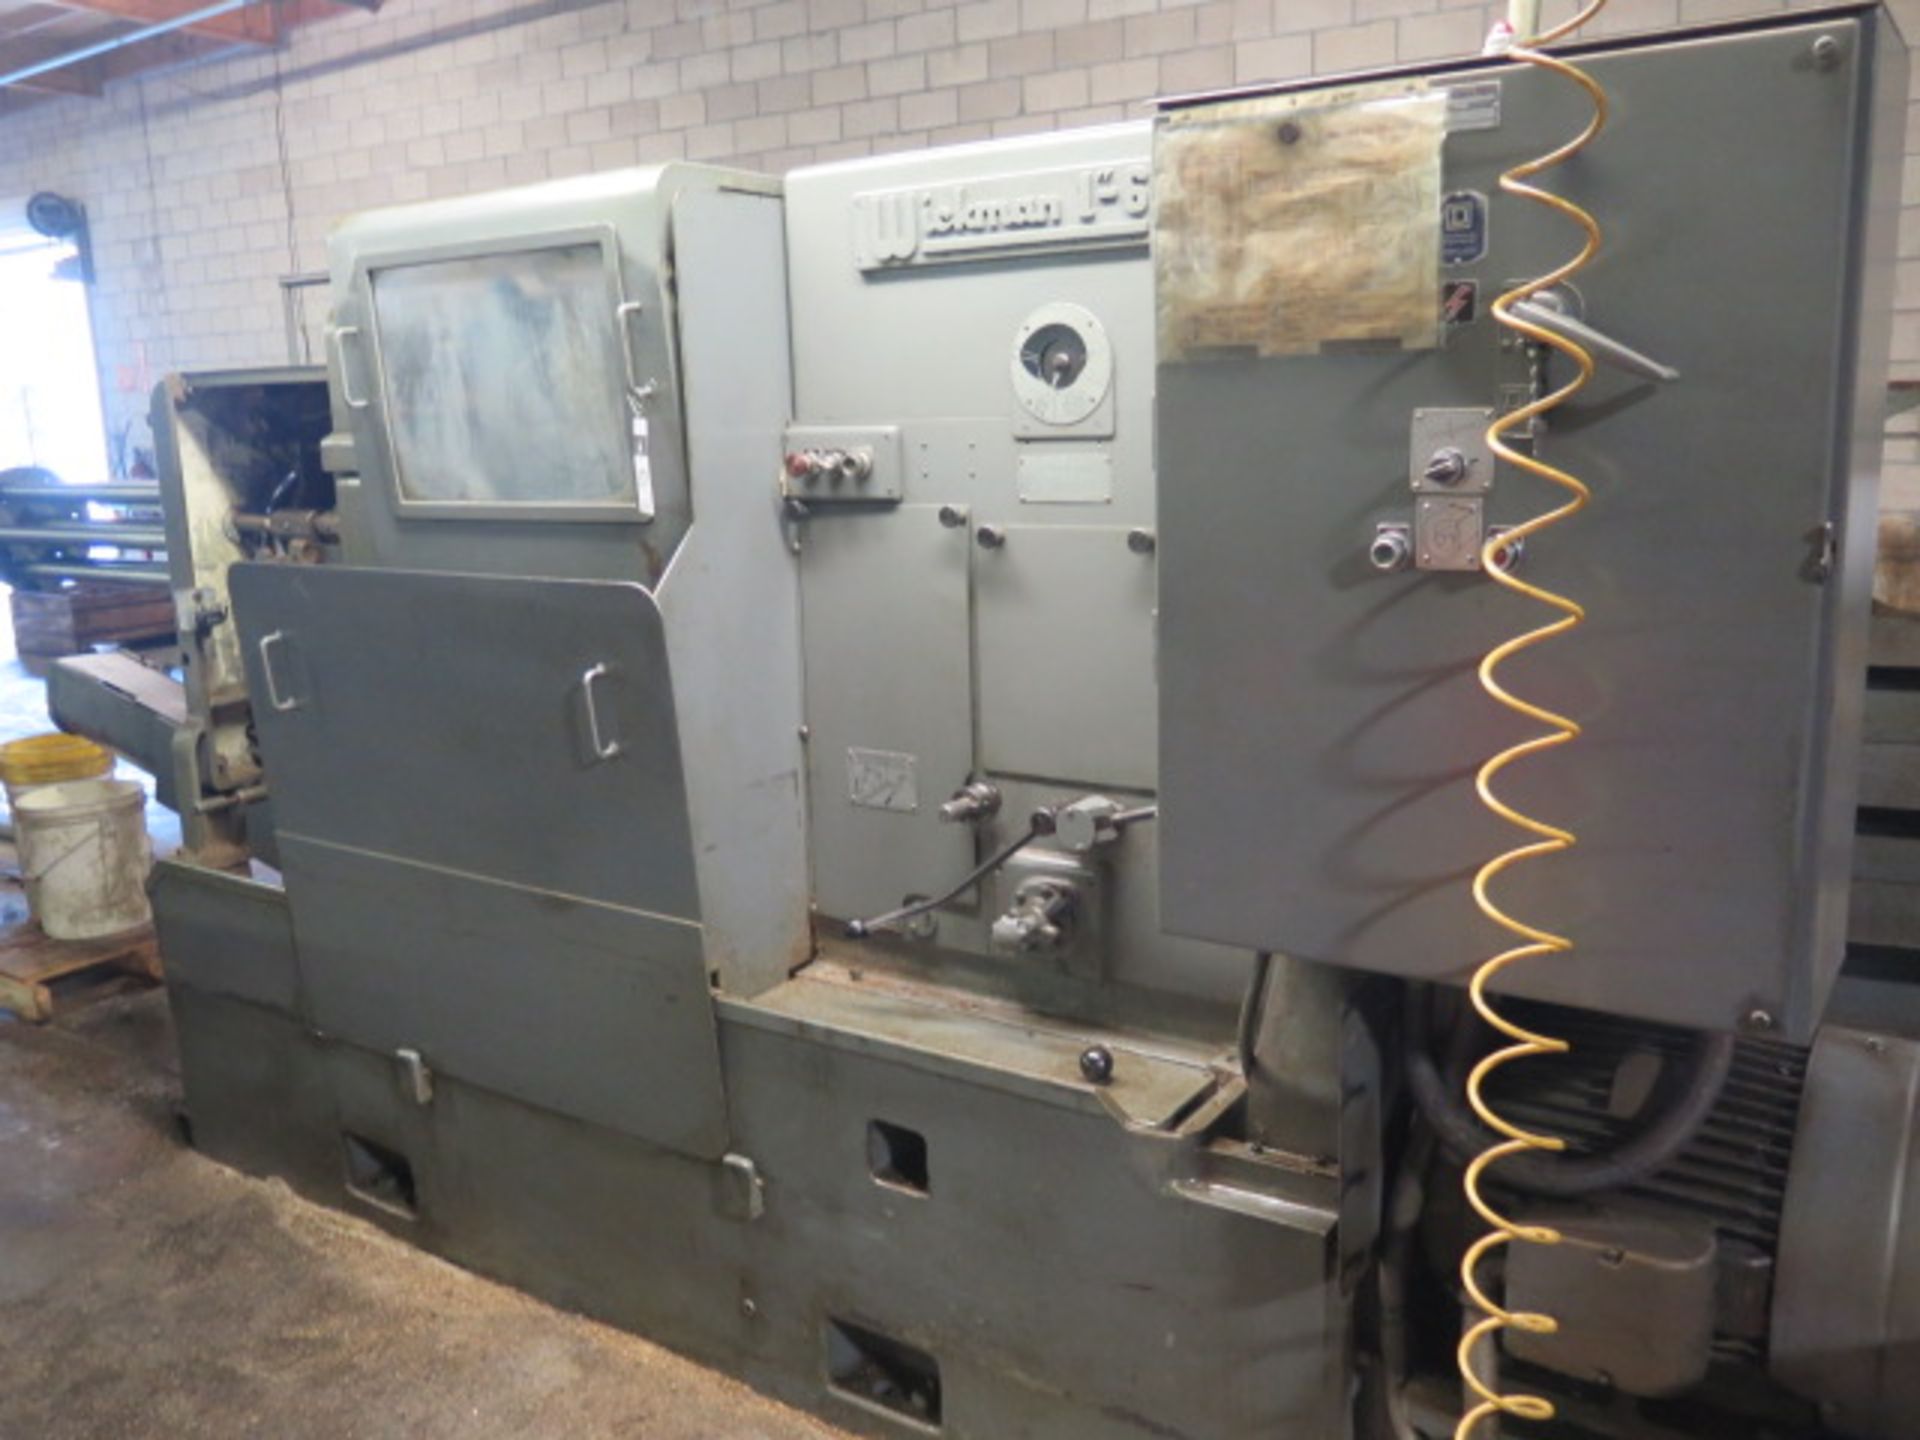 Wickman “1-6” 1” 6-Spindle Automatic Screw Machine s/n 670004 w/ Chip Auger, Coolant, Bar Feed - Image 3 of 10